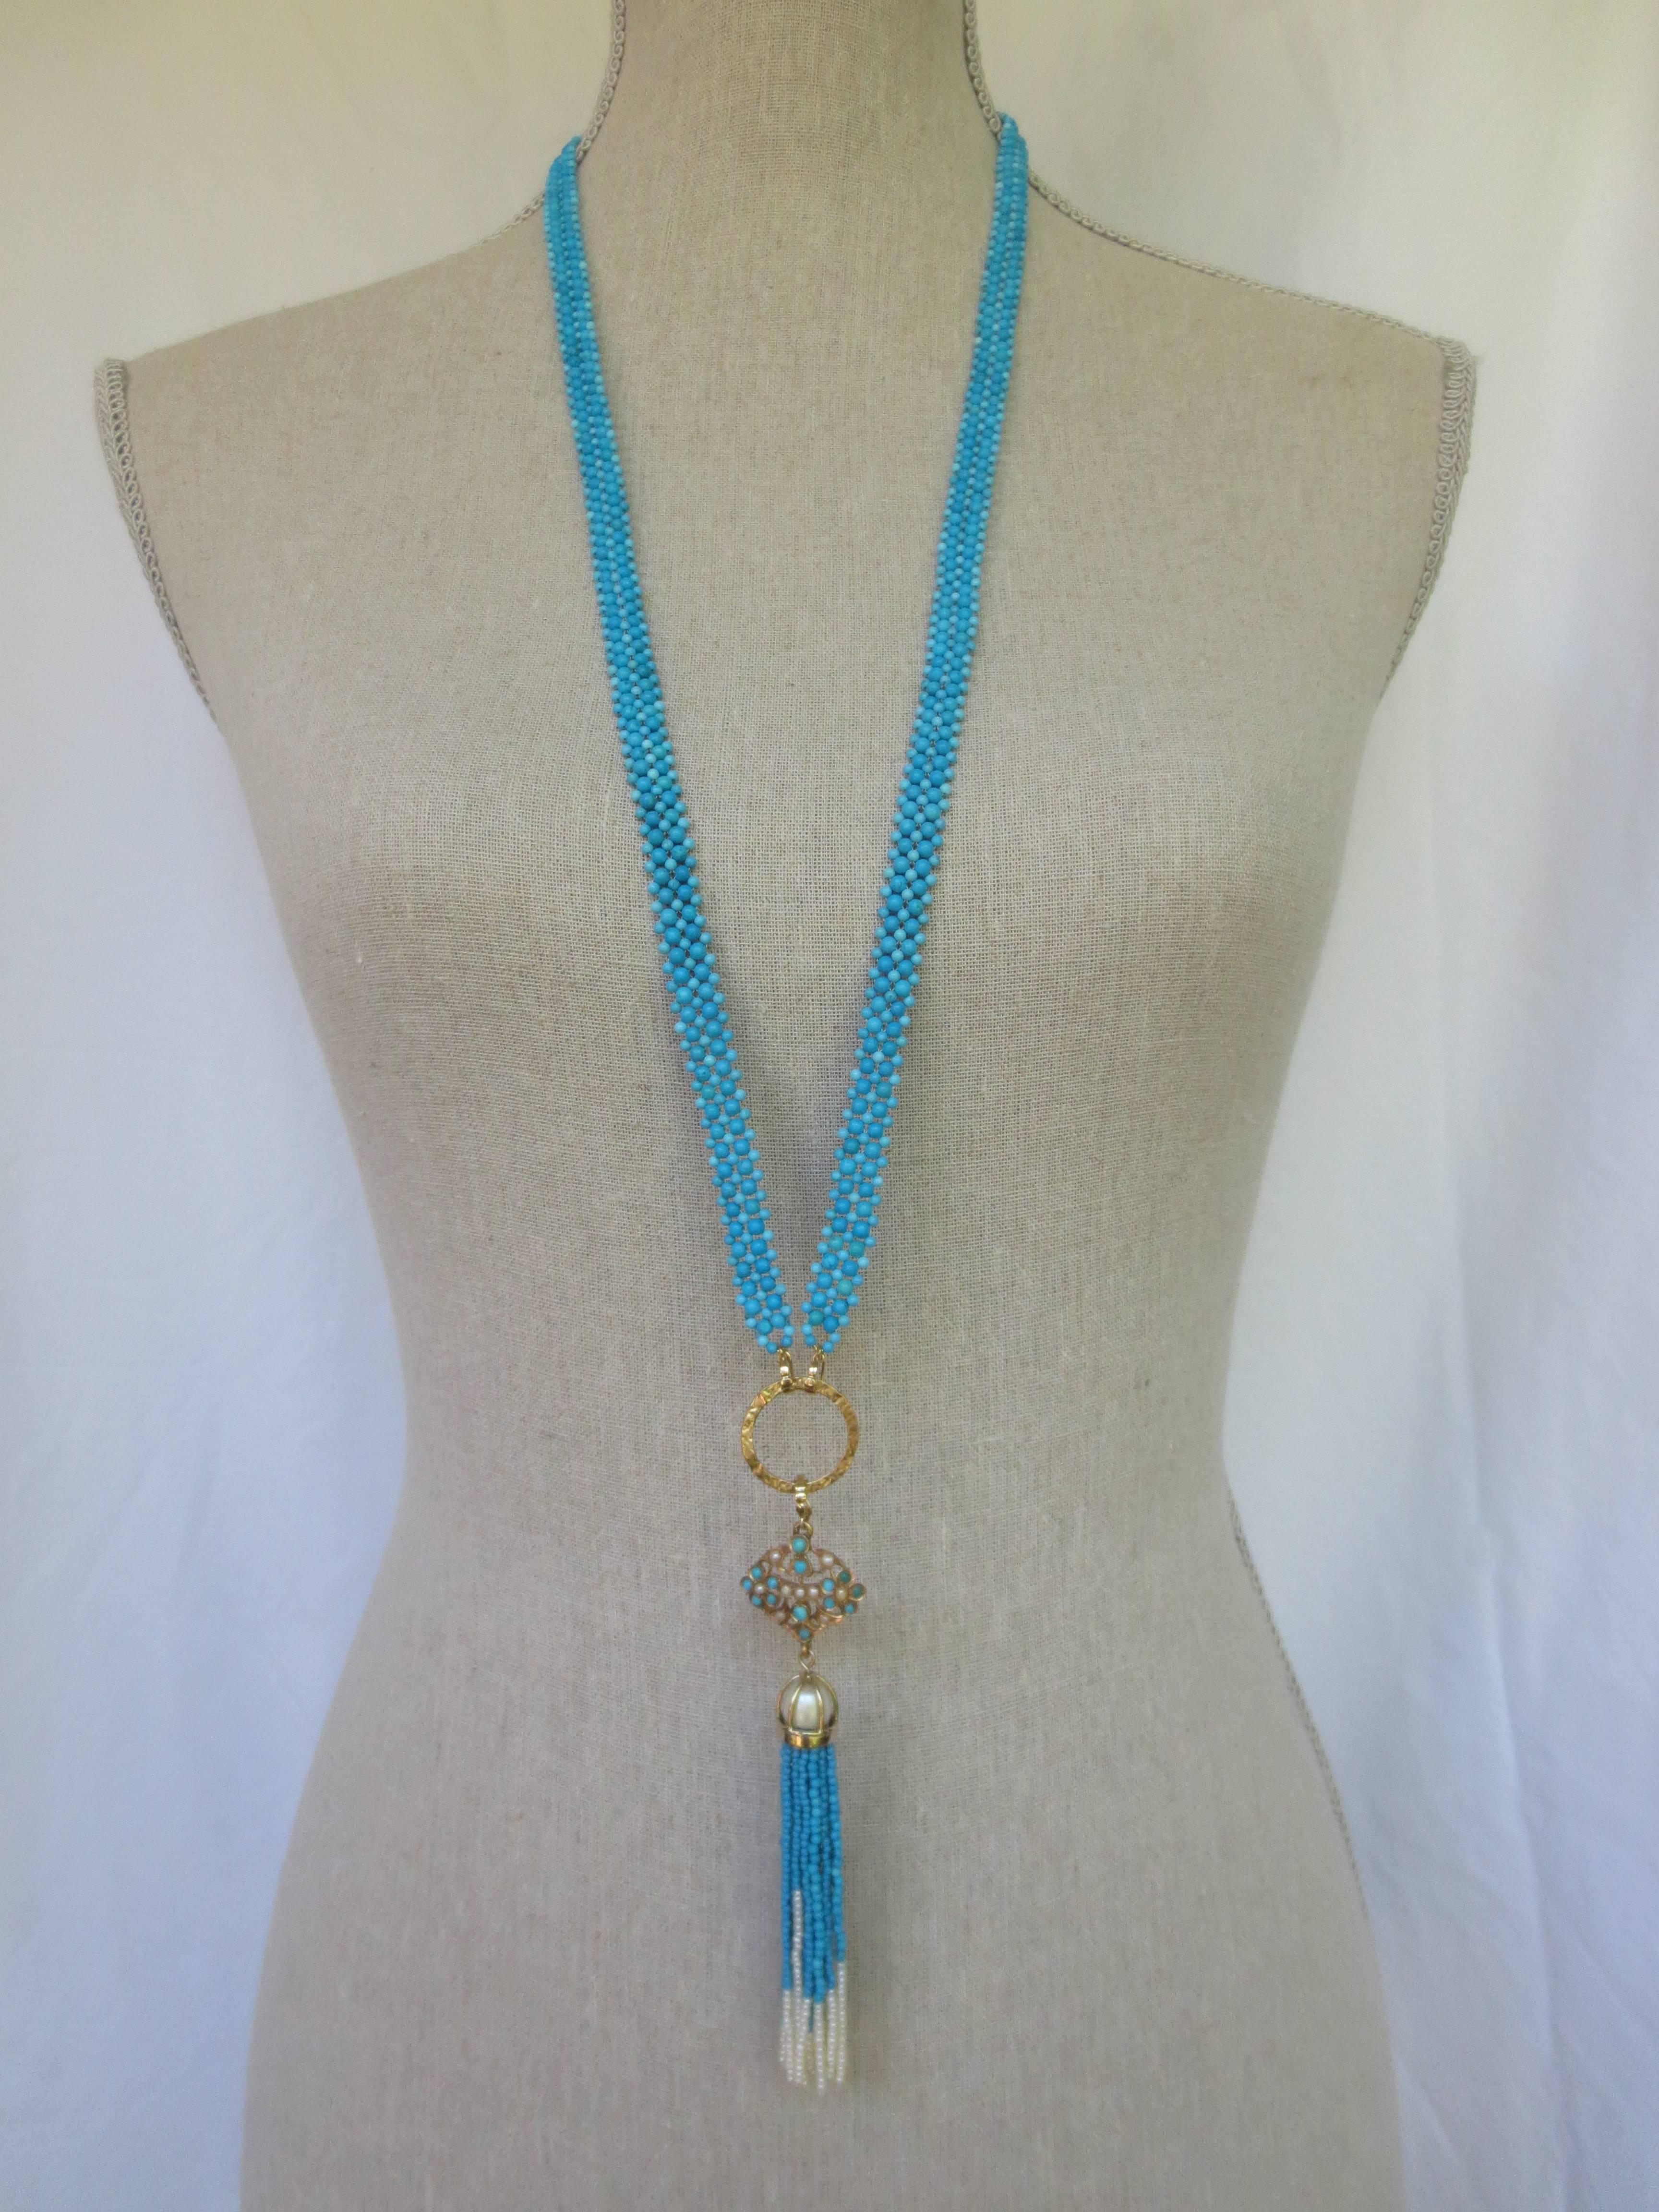 This unique necklace was created utilizing assorted size and hue turquoise beads and woven into a textured ribbon style that sits comfortably and lightly on the body. The vintage gold pendant, set with pearl and turquoise stones, served as the